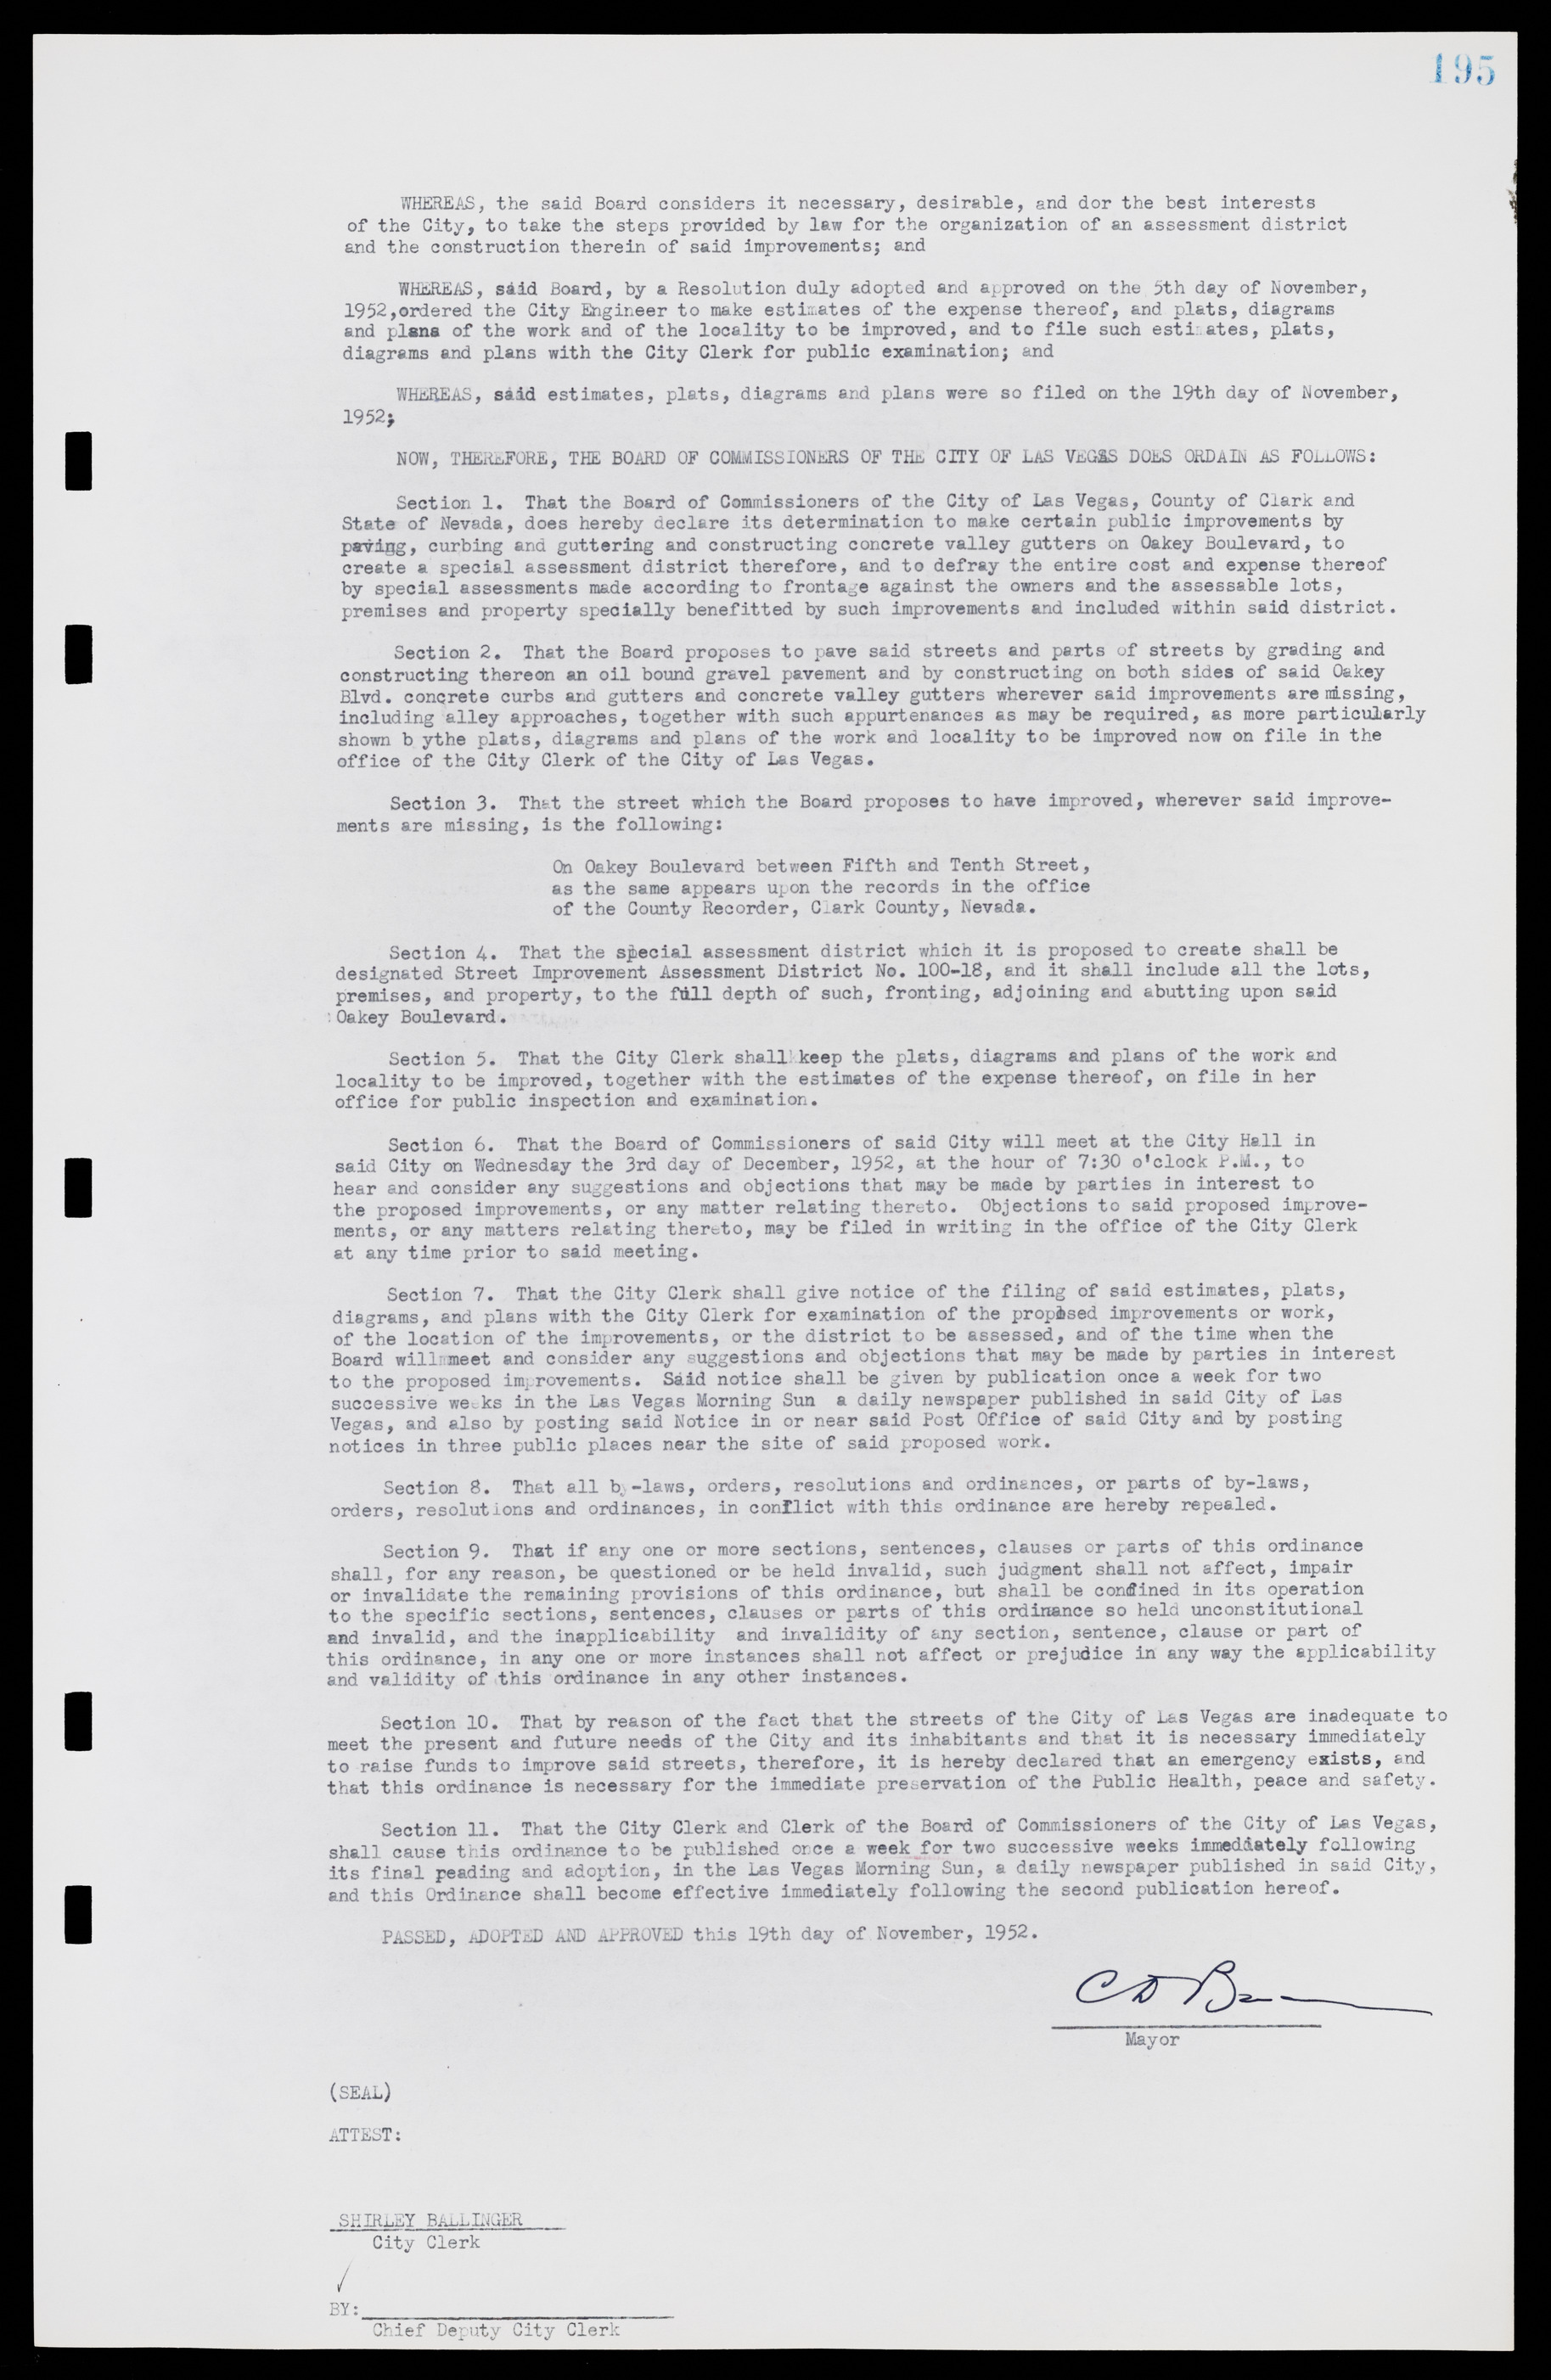 Las Vegas City Commission Minutes, May 26, 1952 to February 17, 1954, lvc000008-209